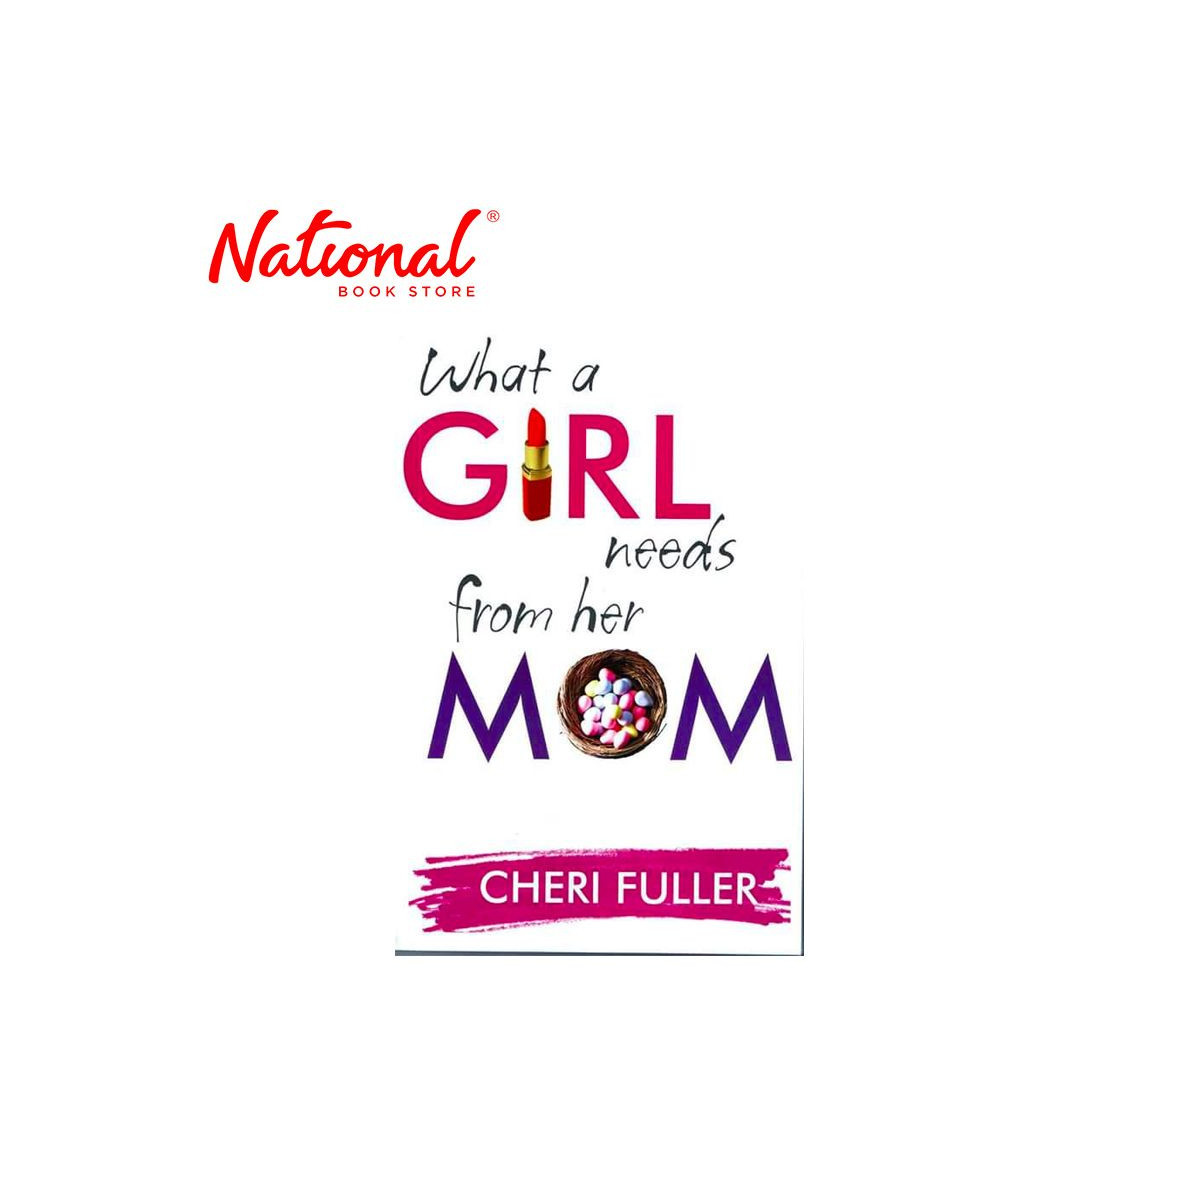 What A Girl Needs From Her Mom Trade Paperback by Cherri Fuller - Parenting Books